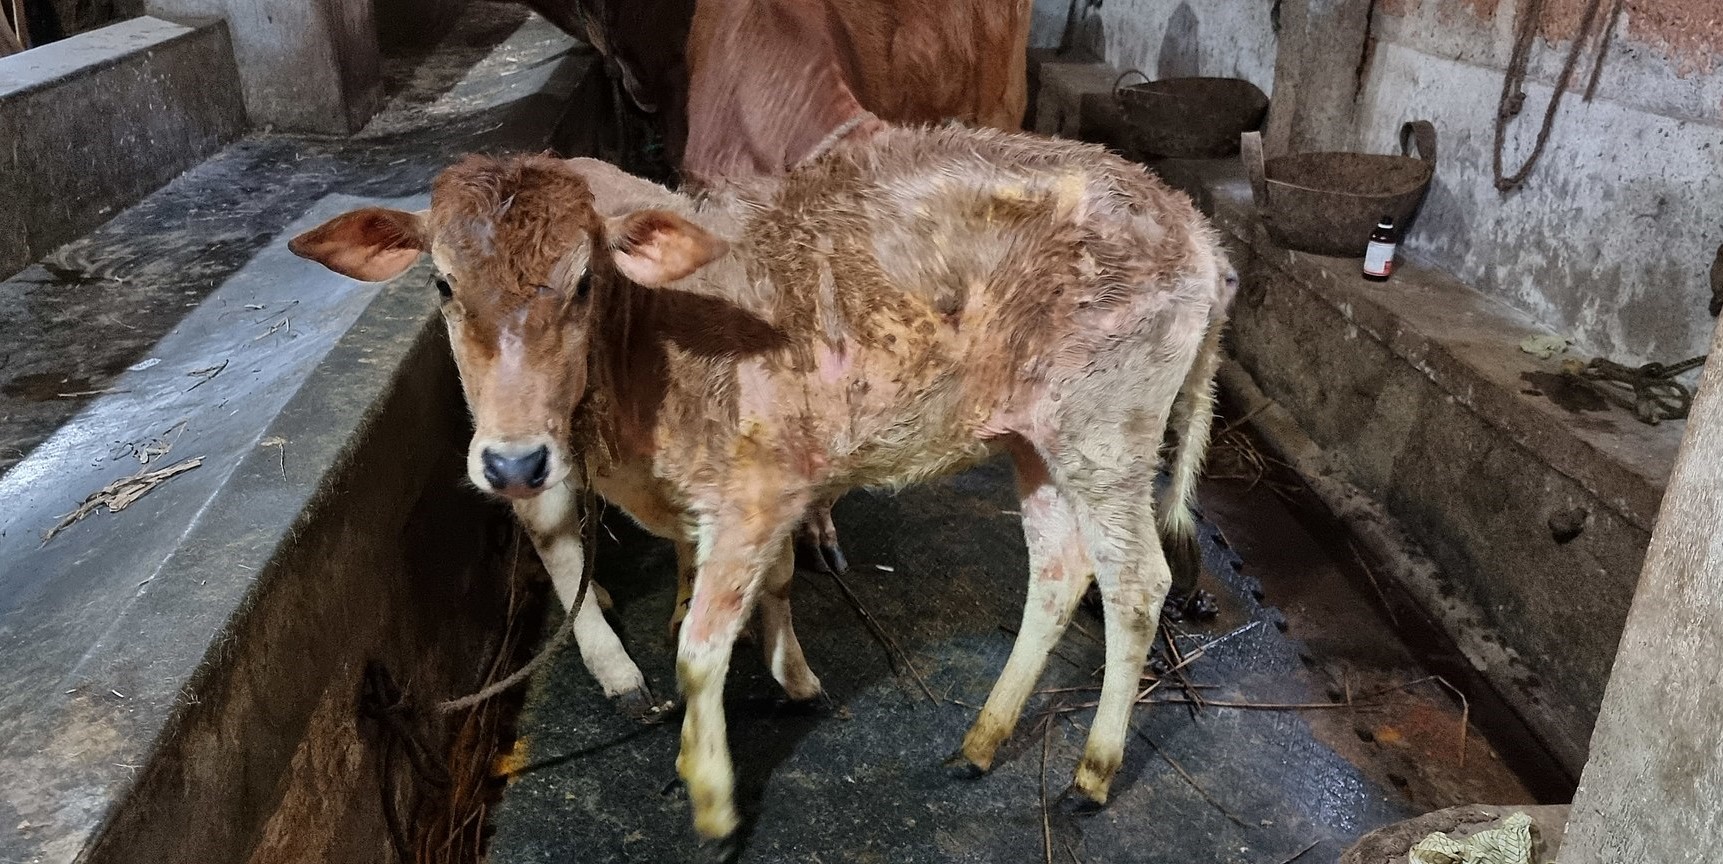 A calf affected with Lumpy Skin Disease. (Creative Commons)